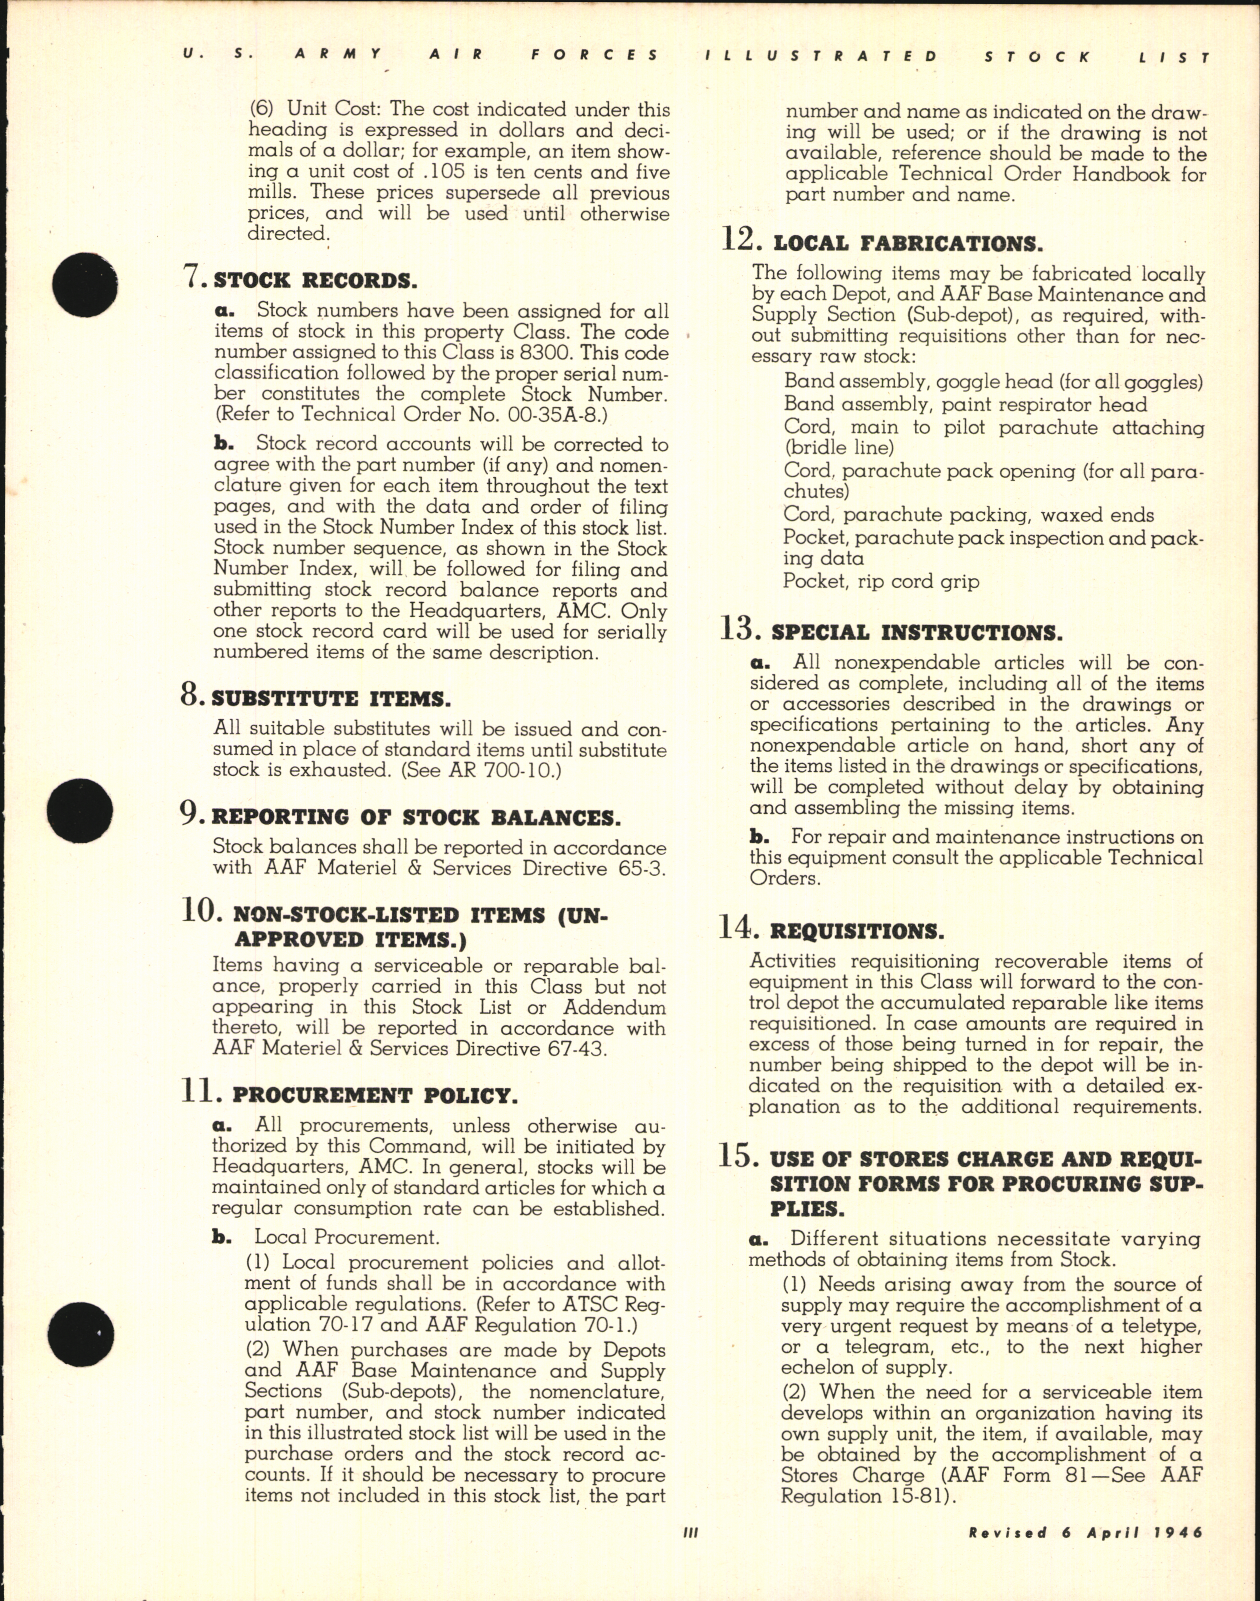 Sample page 5 from AirCorps Library document: Illustrated Stock List Special Clothing and Personal Equipment